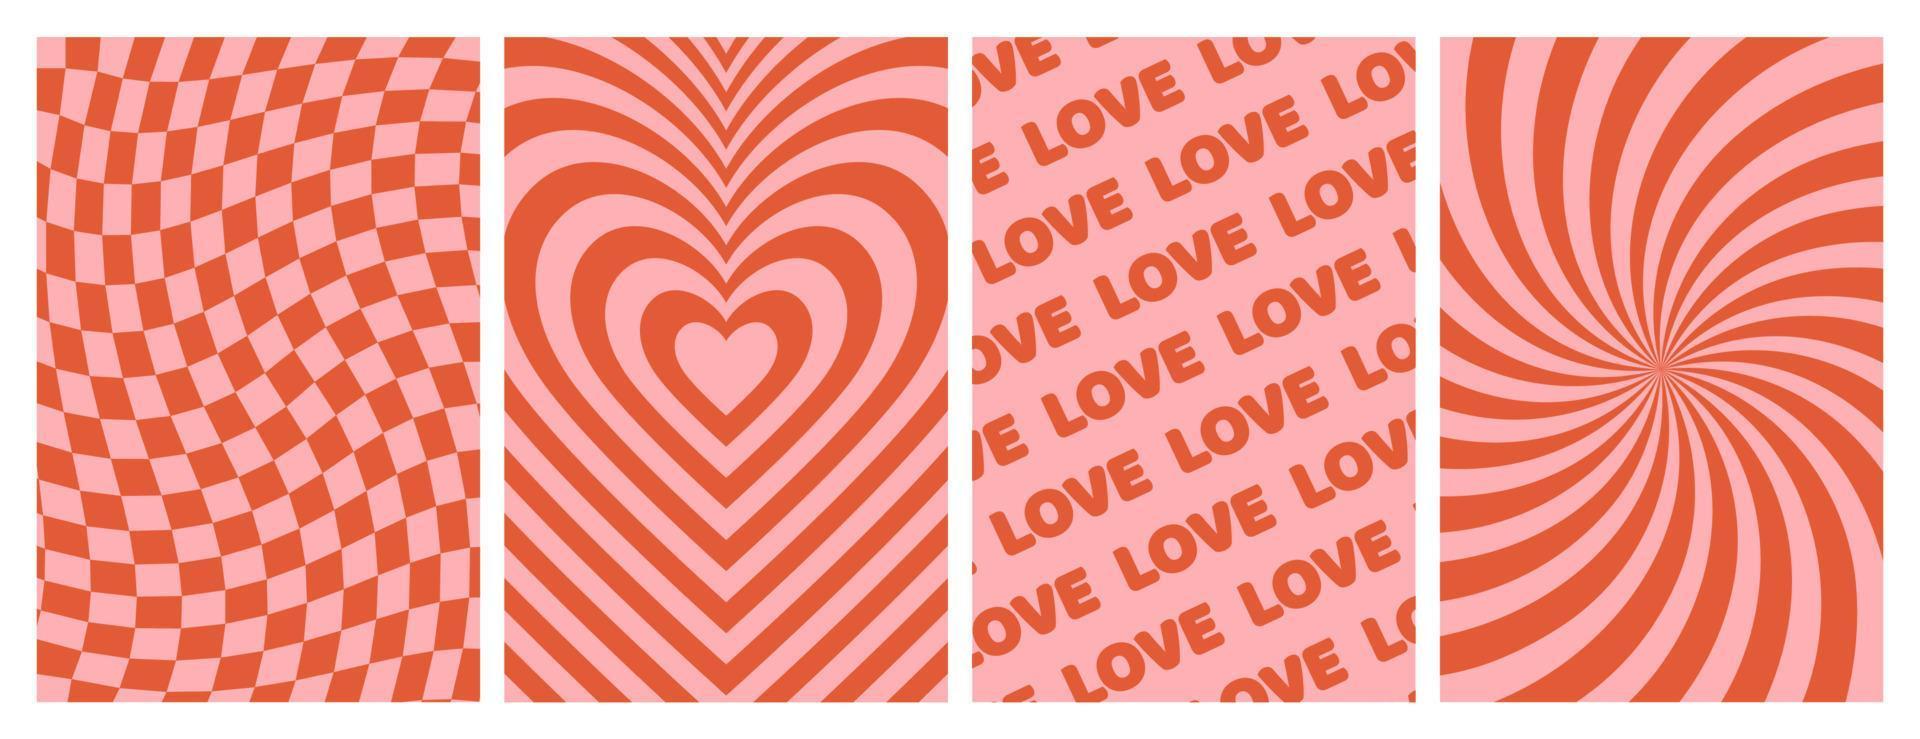 Groovy lovely backgrounds. Love concept. Happy Valentines day greeting card. Pink red colors. vector